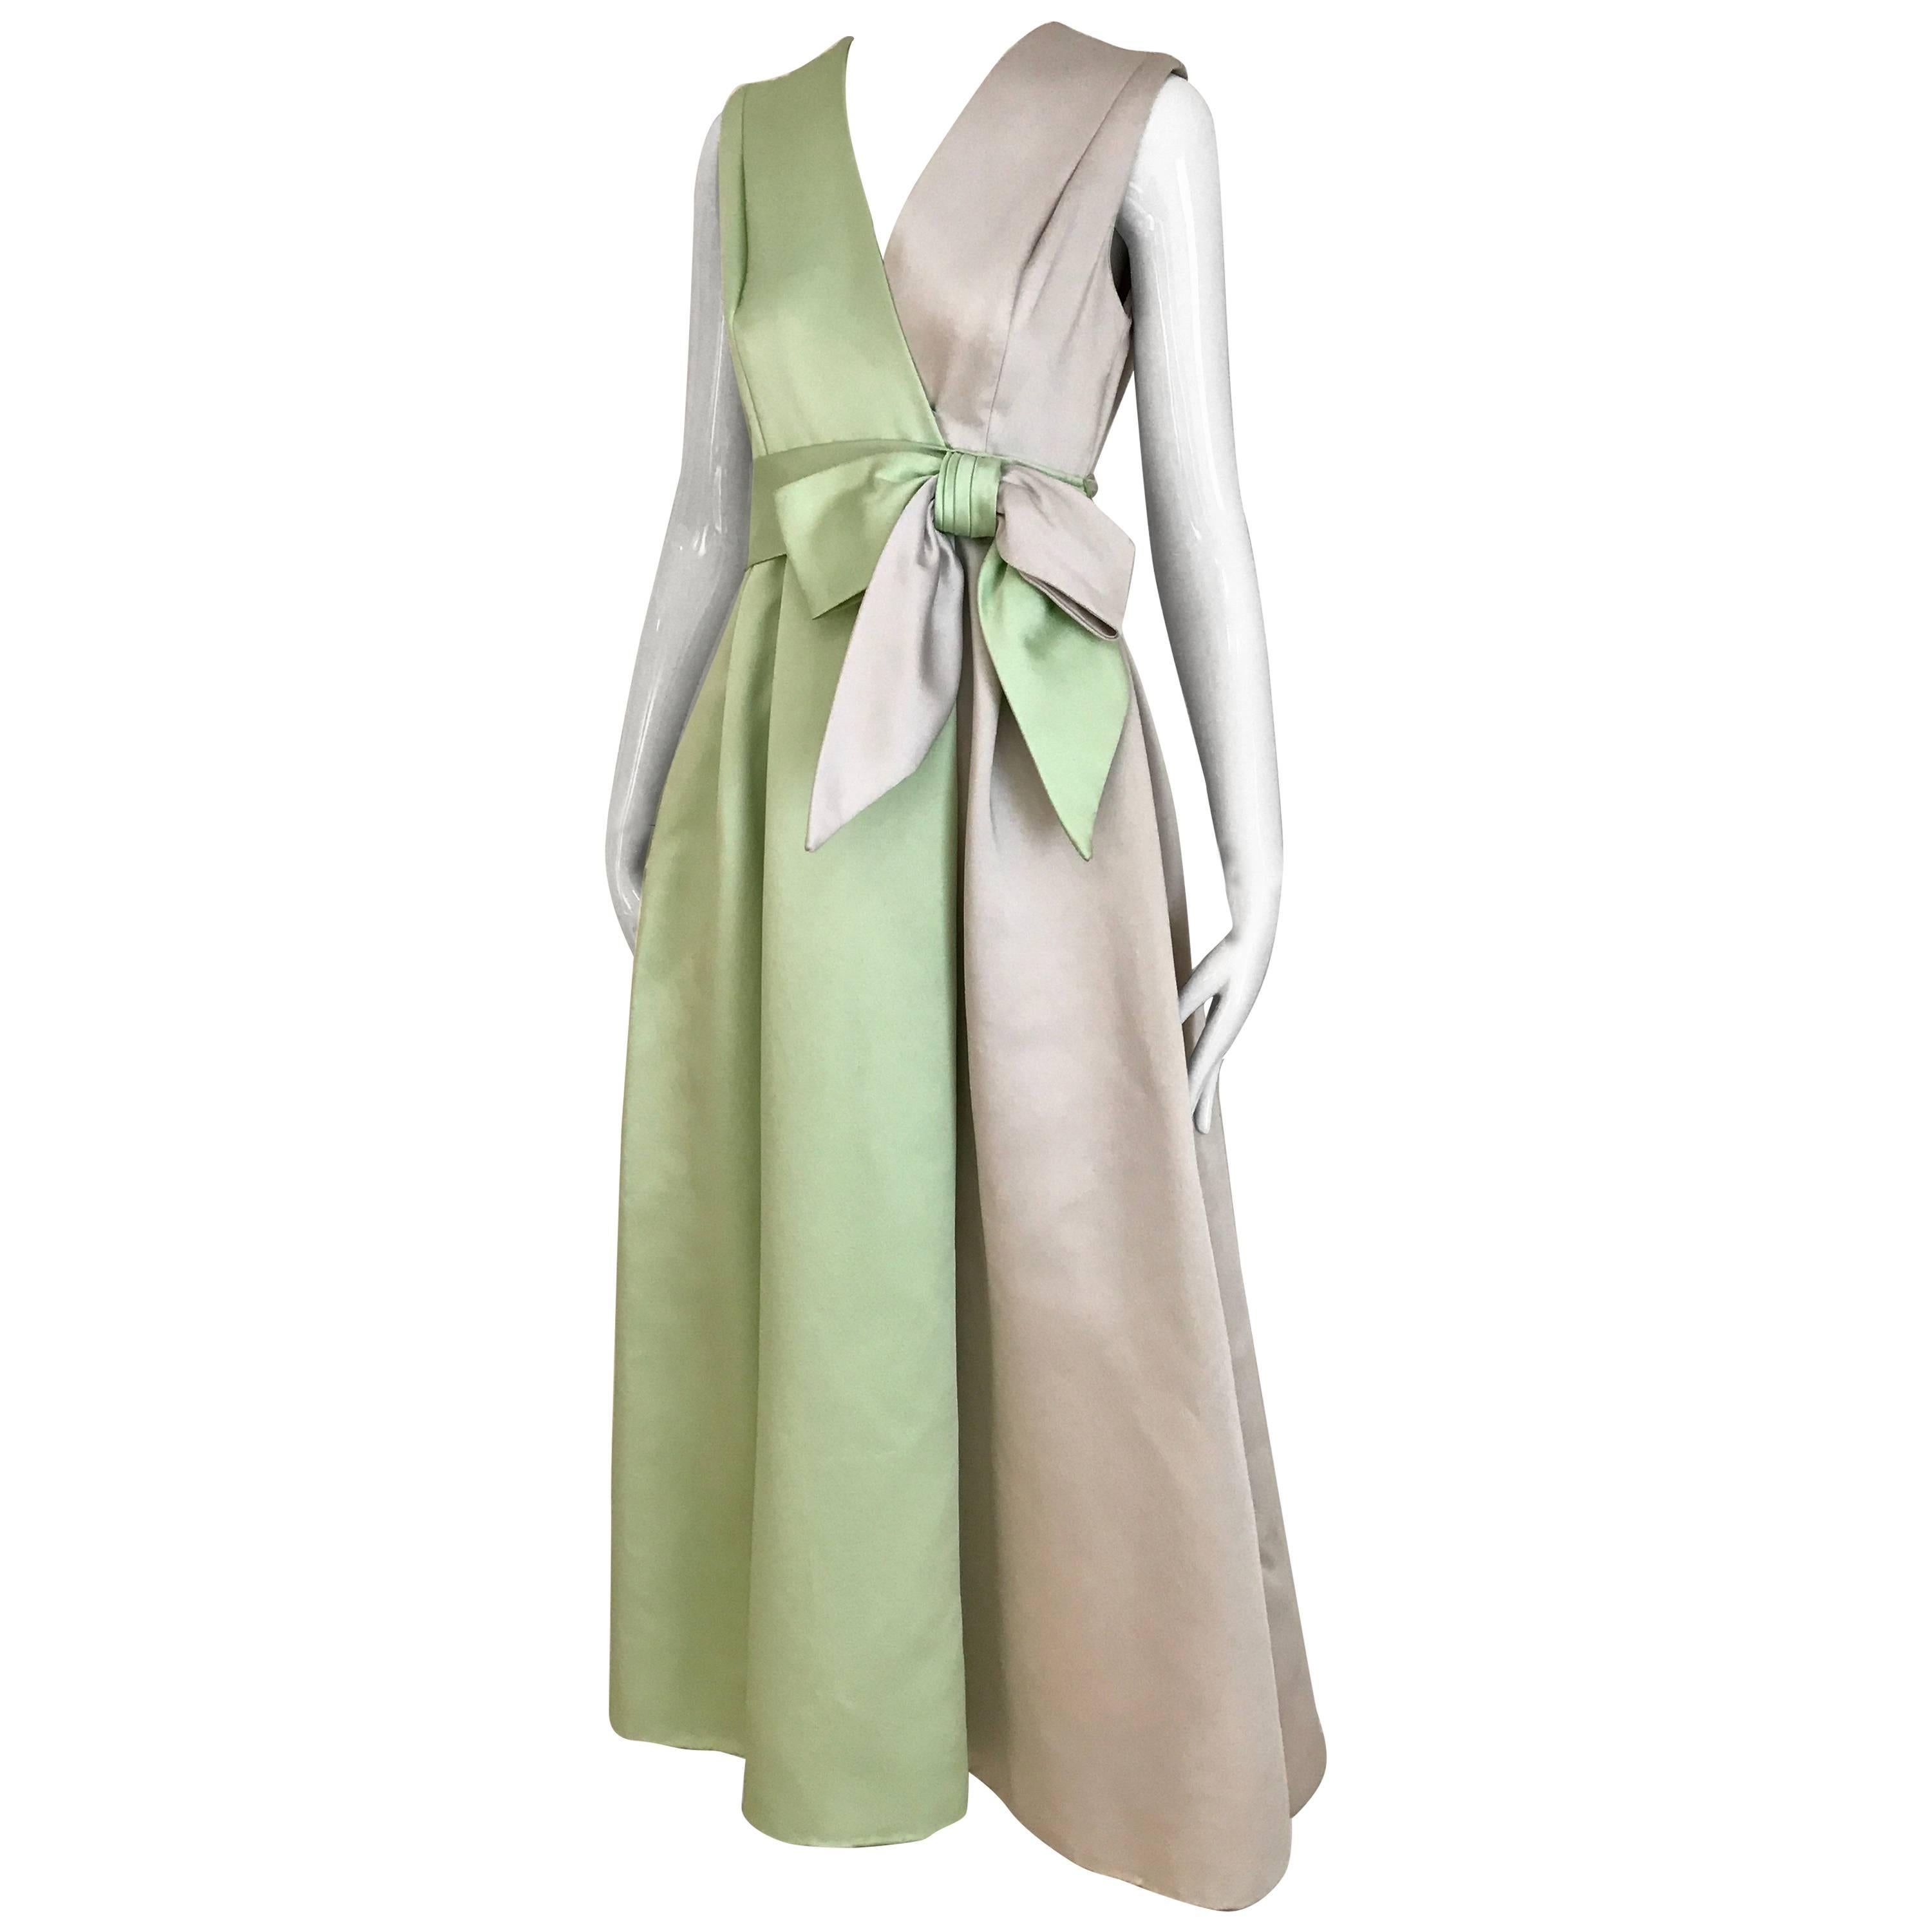 1960s Celadon Green and Grey Sleeveless Silk Dres with Bow